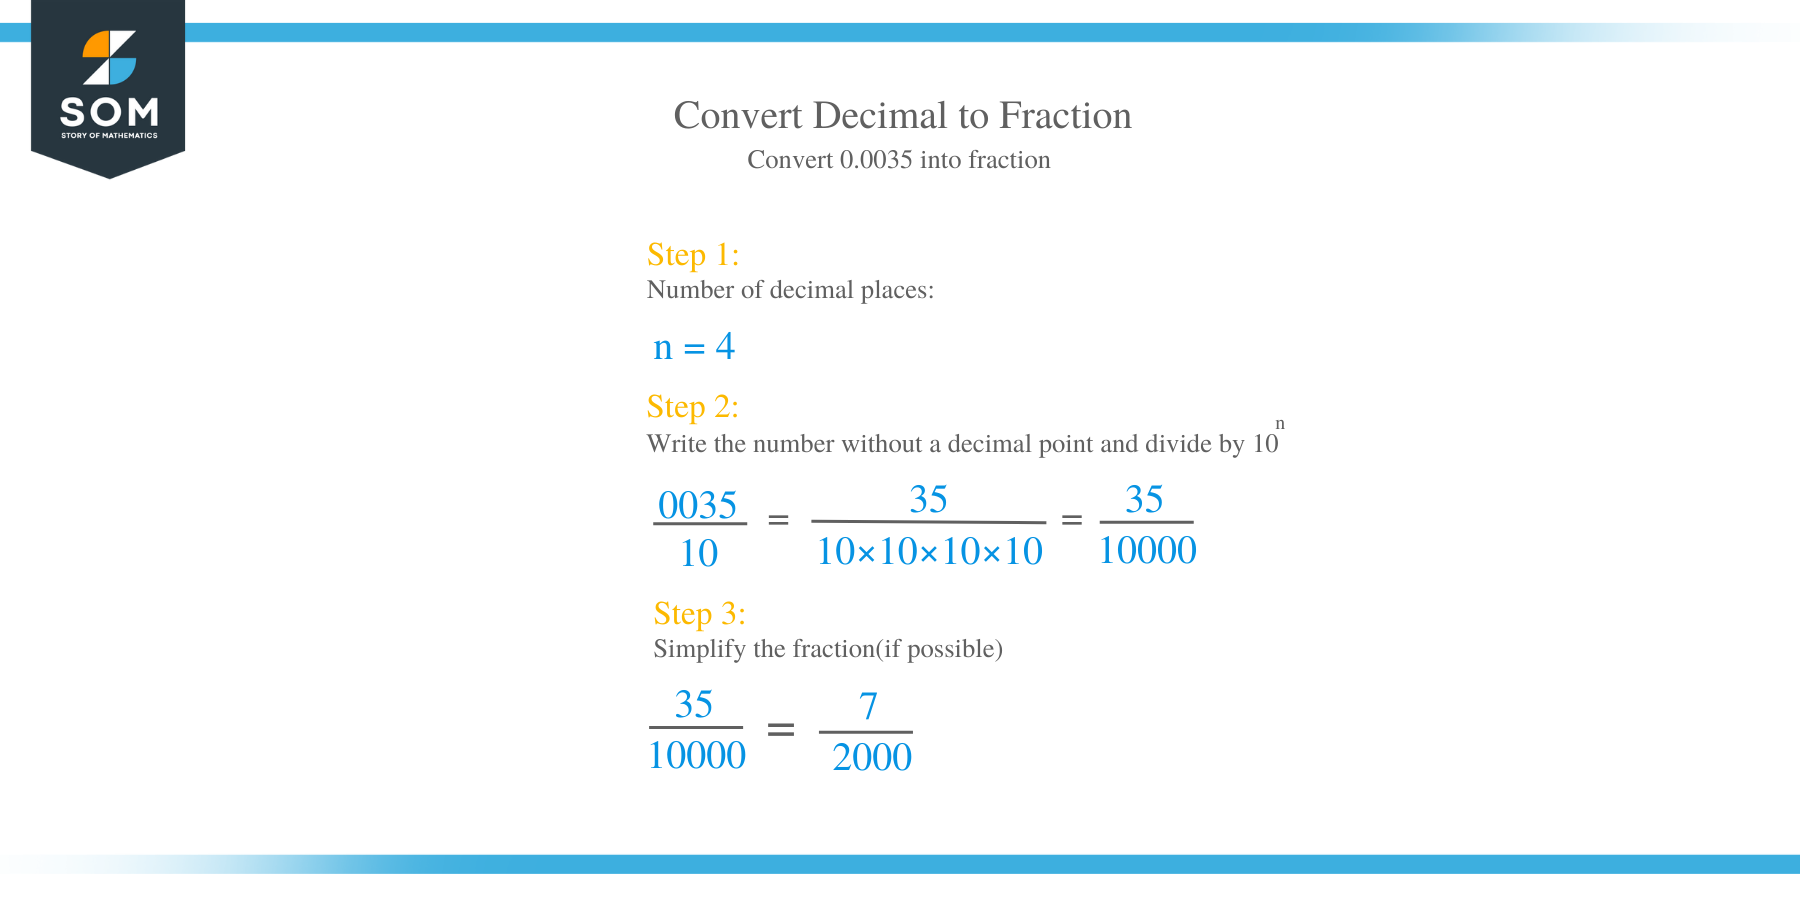 How to Convert Decimal to Fraction?